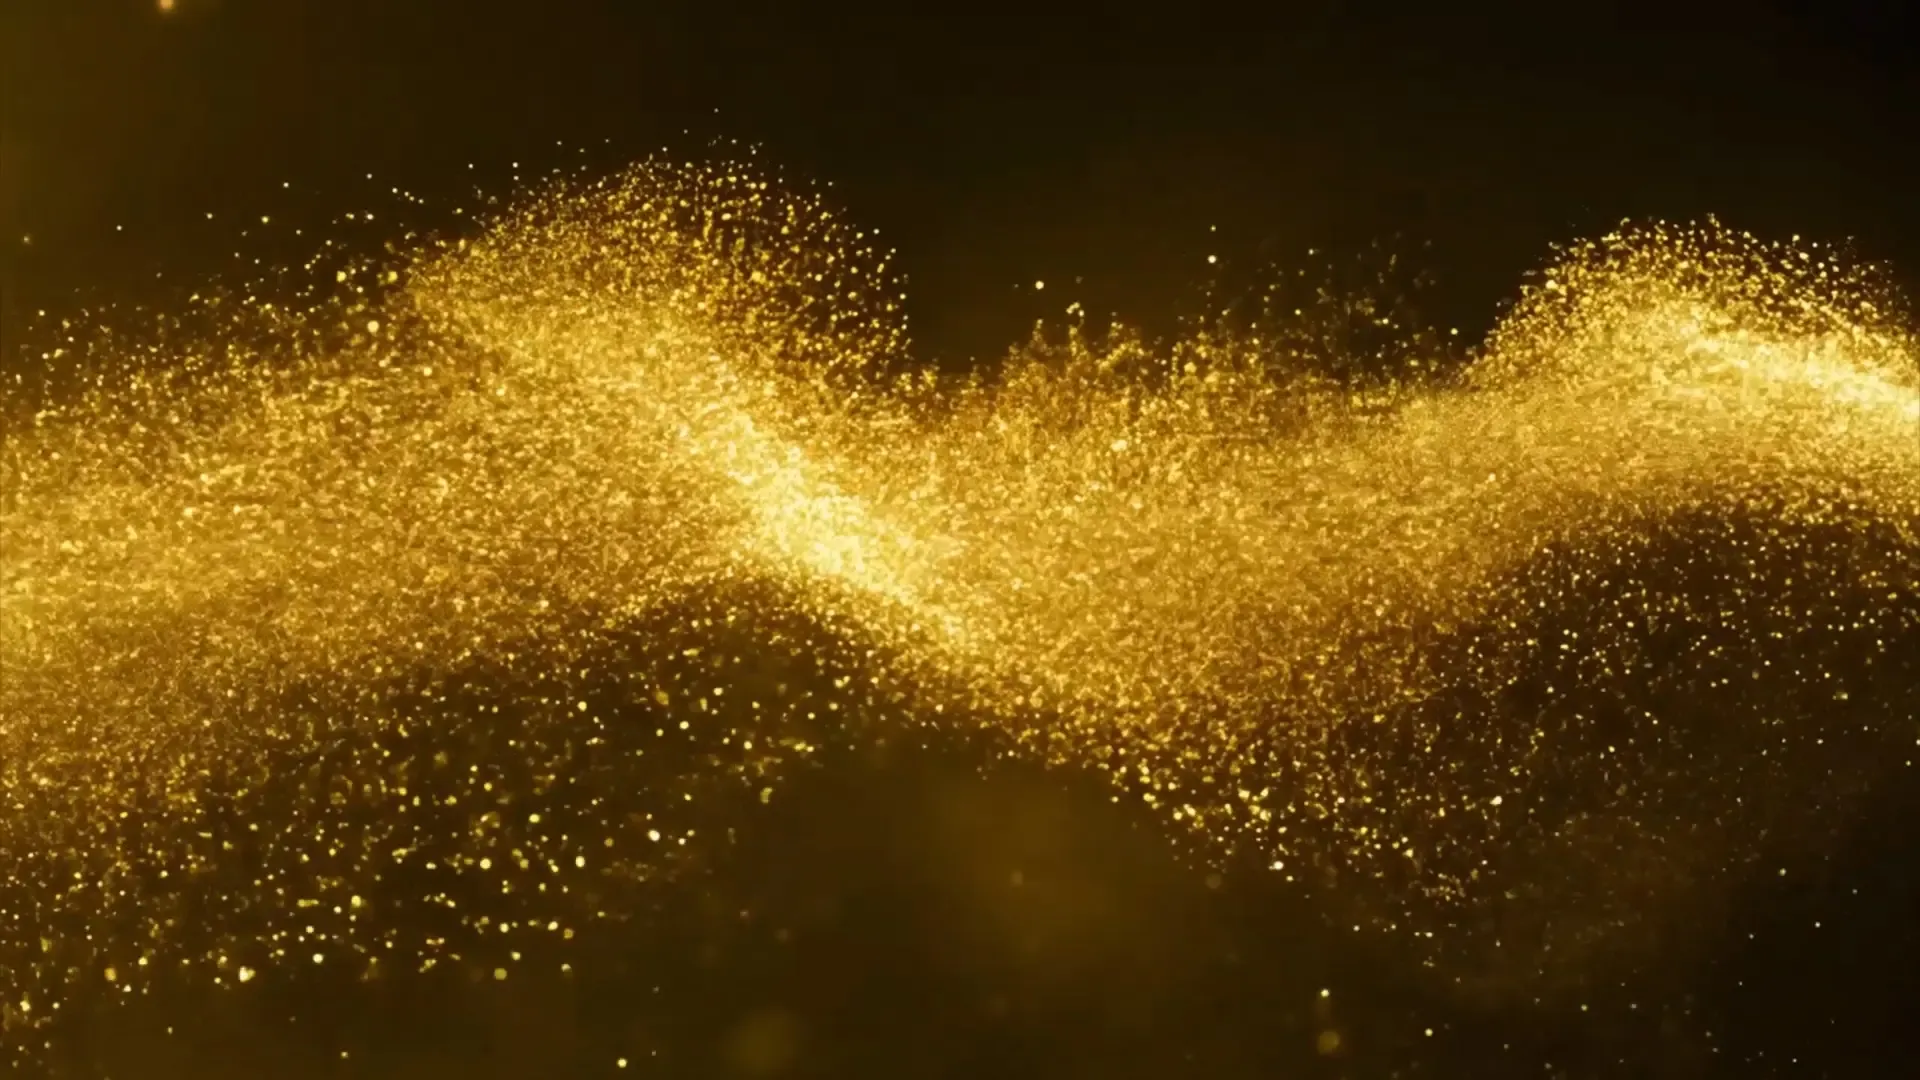 Golden Dust Overlay with Sparkling Particle Magic